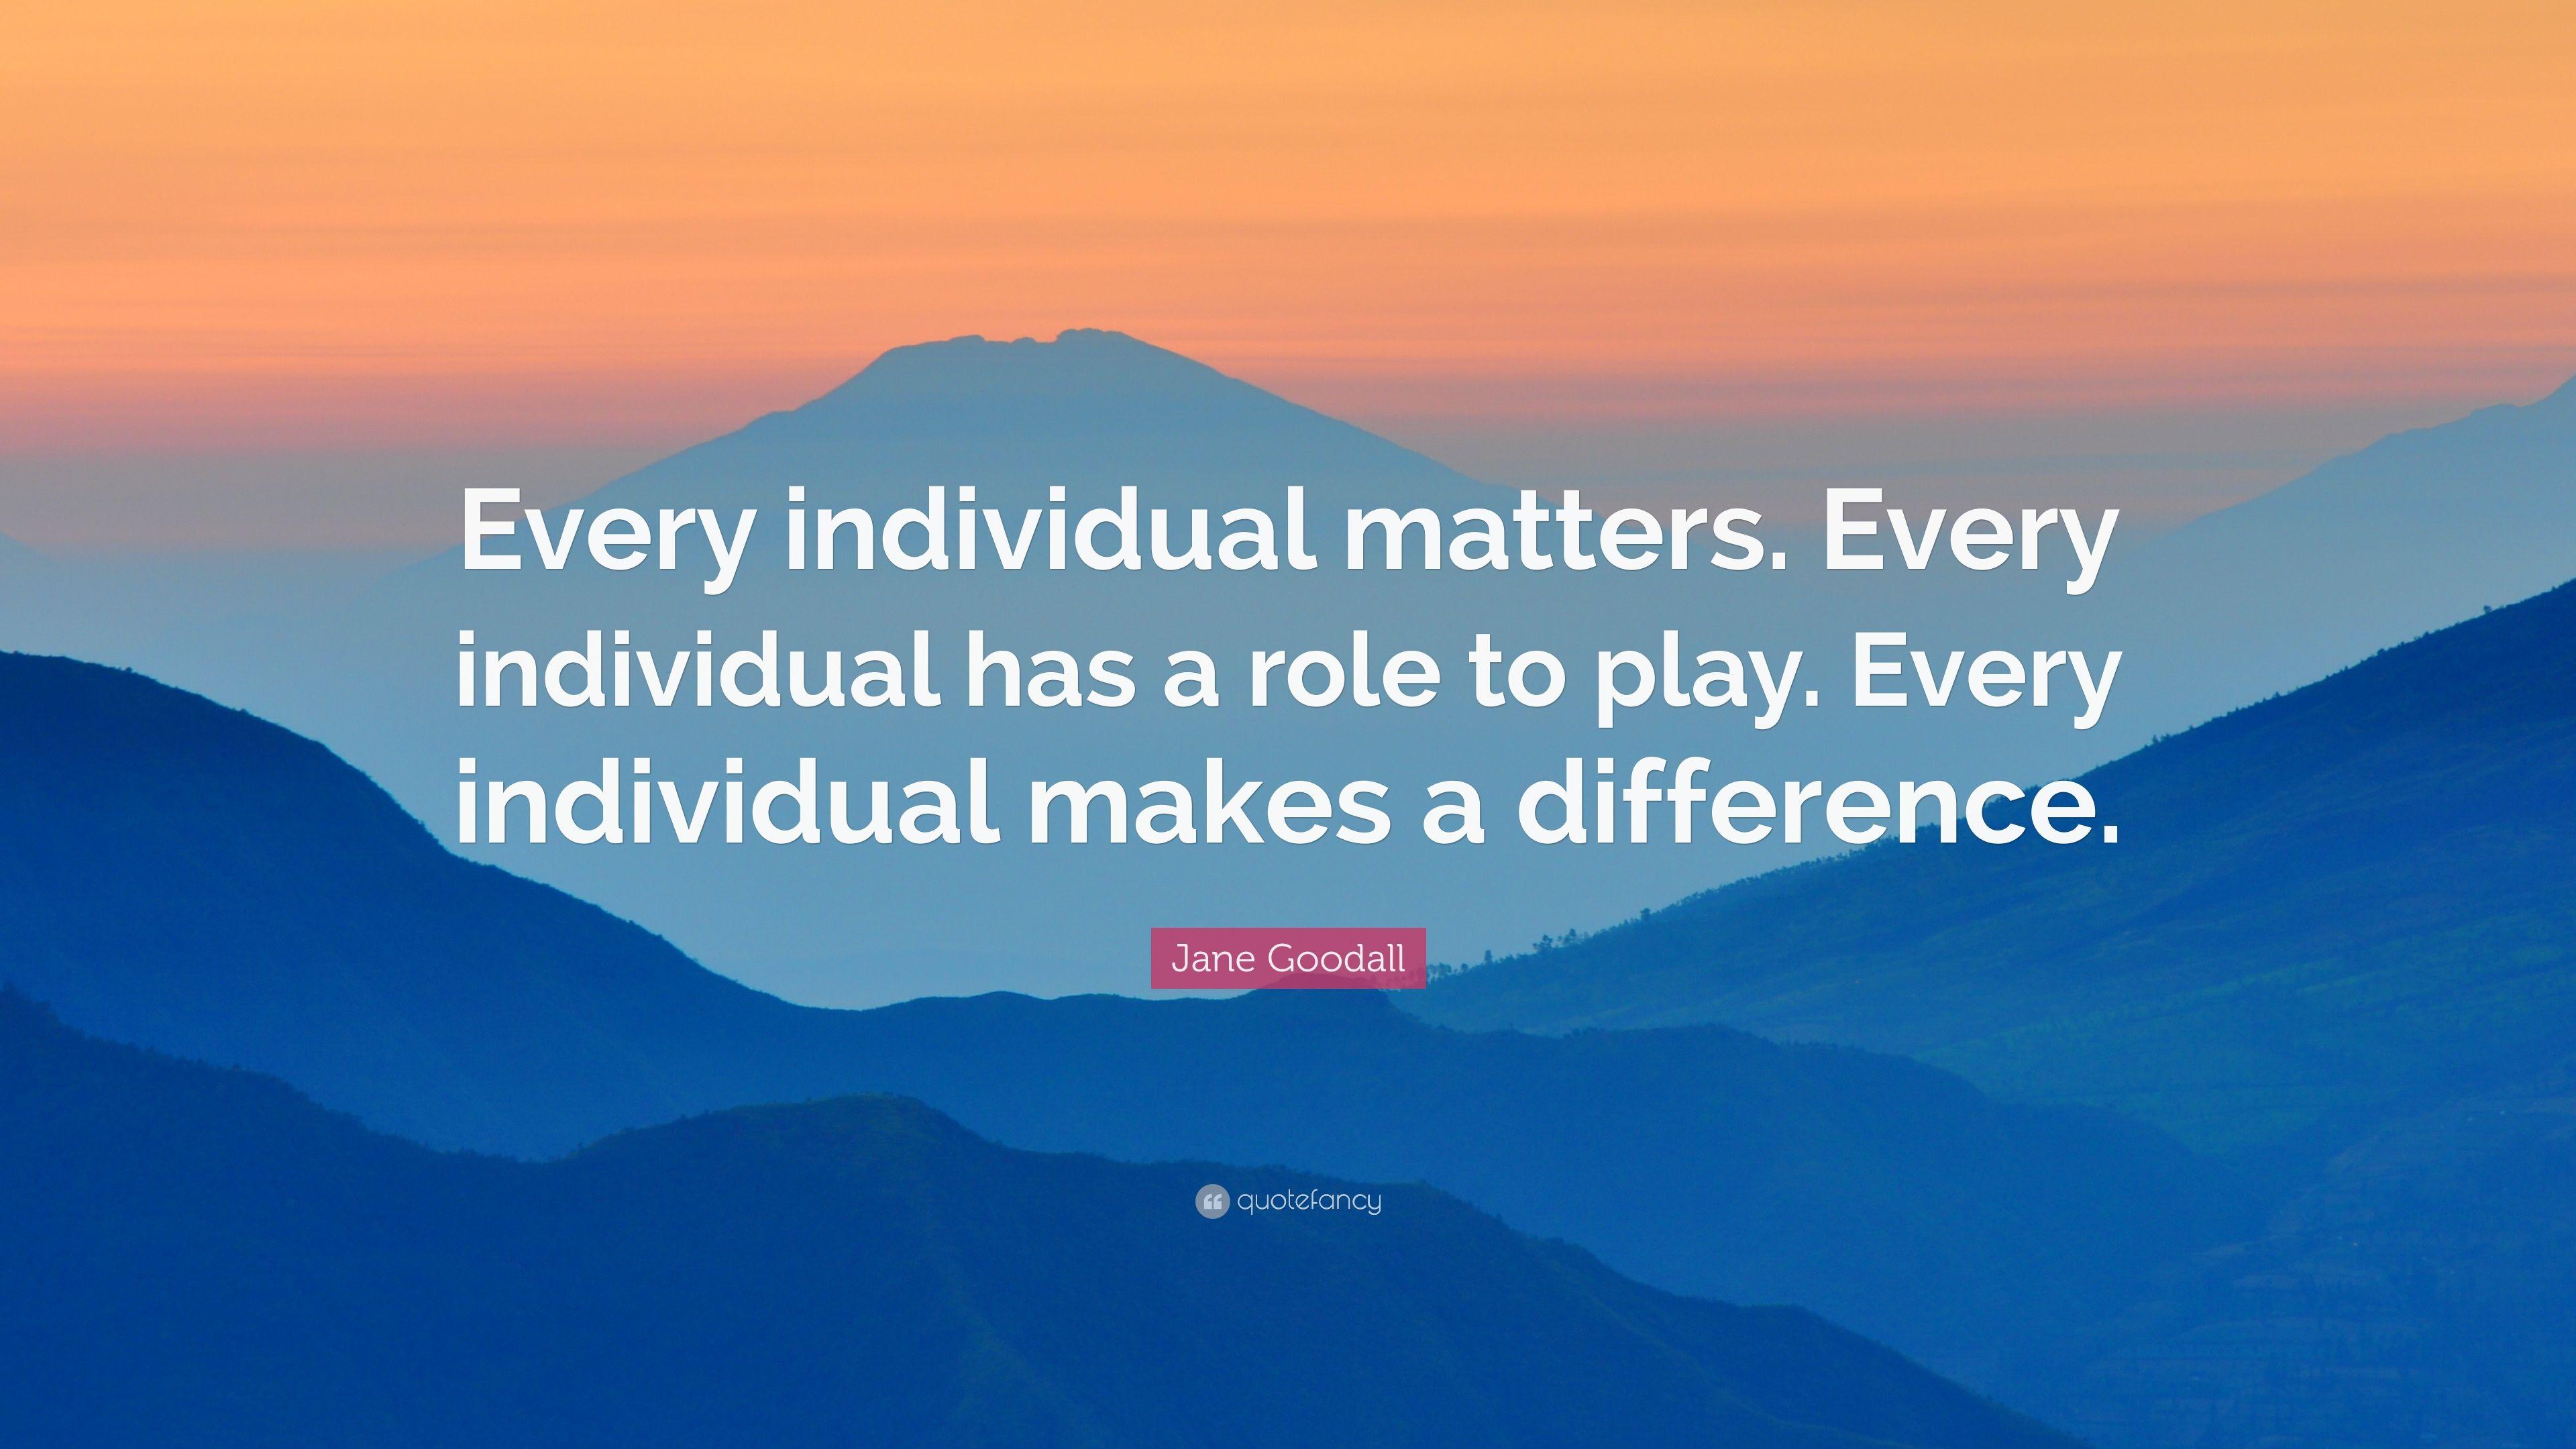 Jane Goodall Quote: “Every individual matters. Every individual